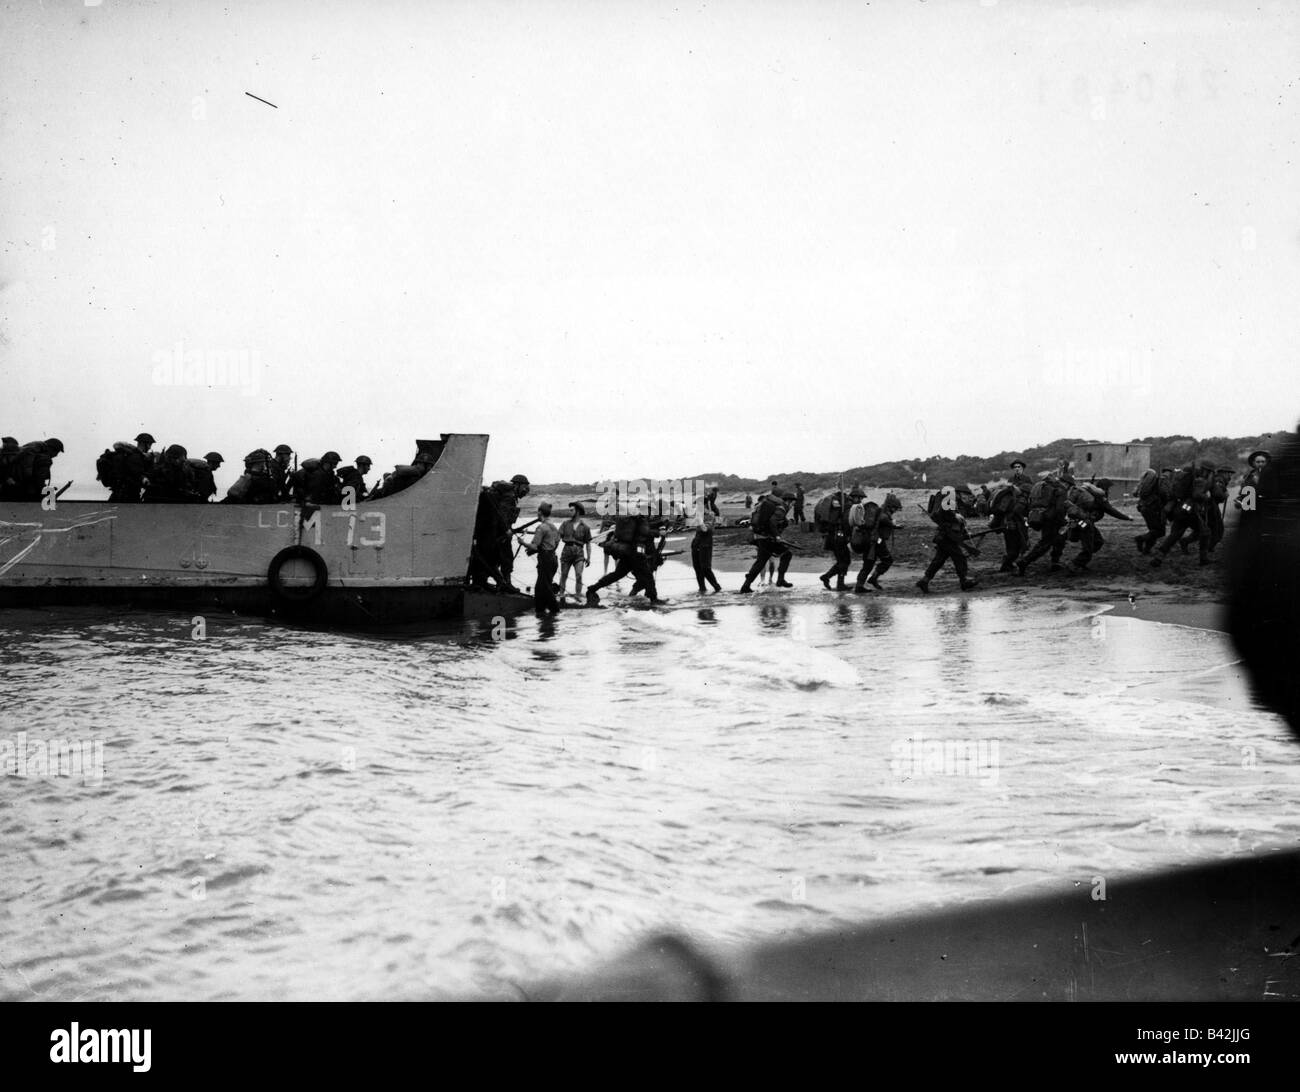 events, Second World War / WWII, North Africa, Algeria, British troops landing near Algiers, 8.11.1942, Stock Photo